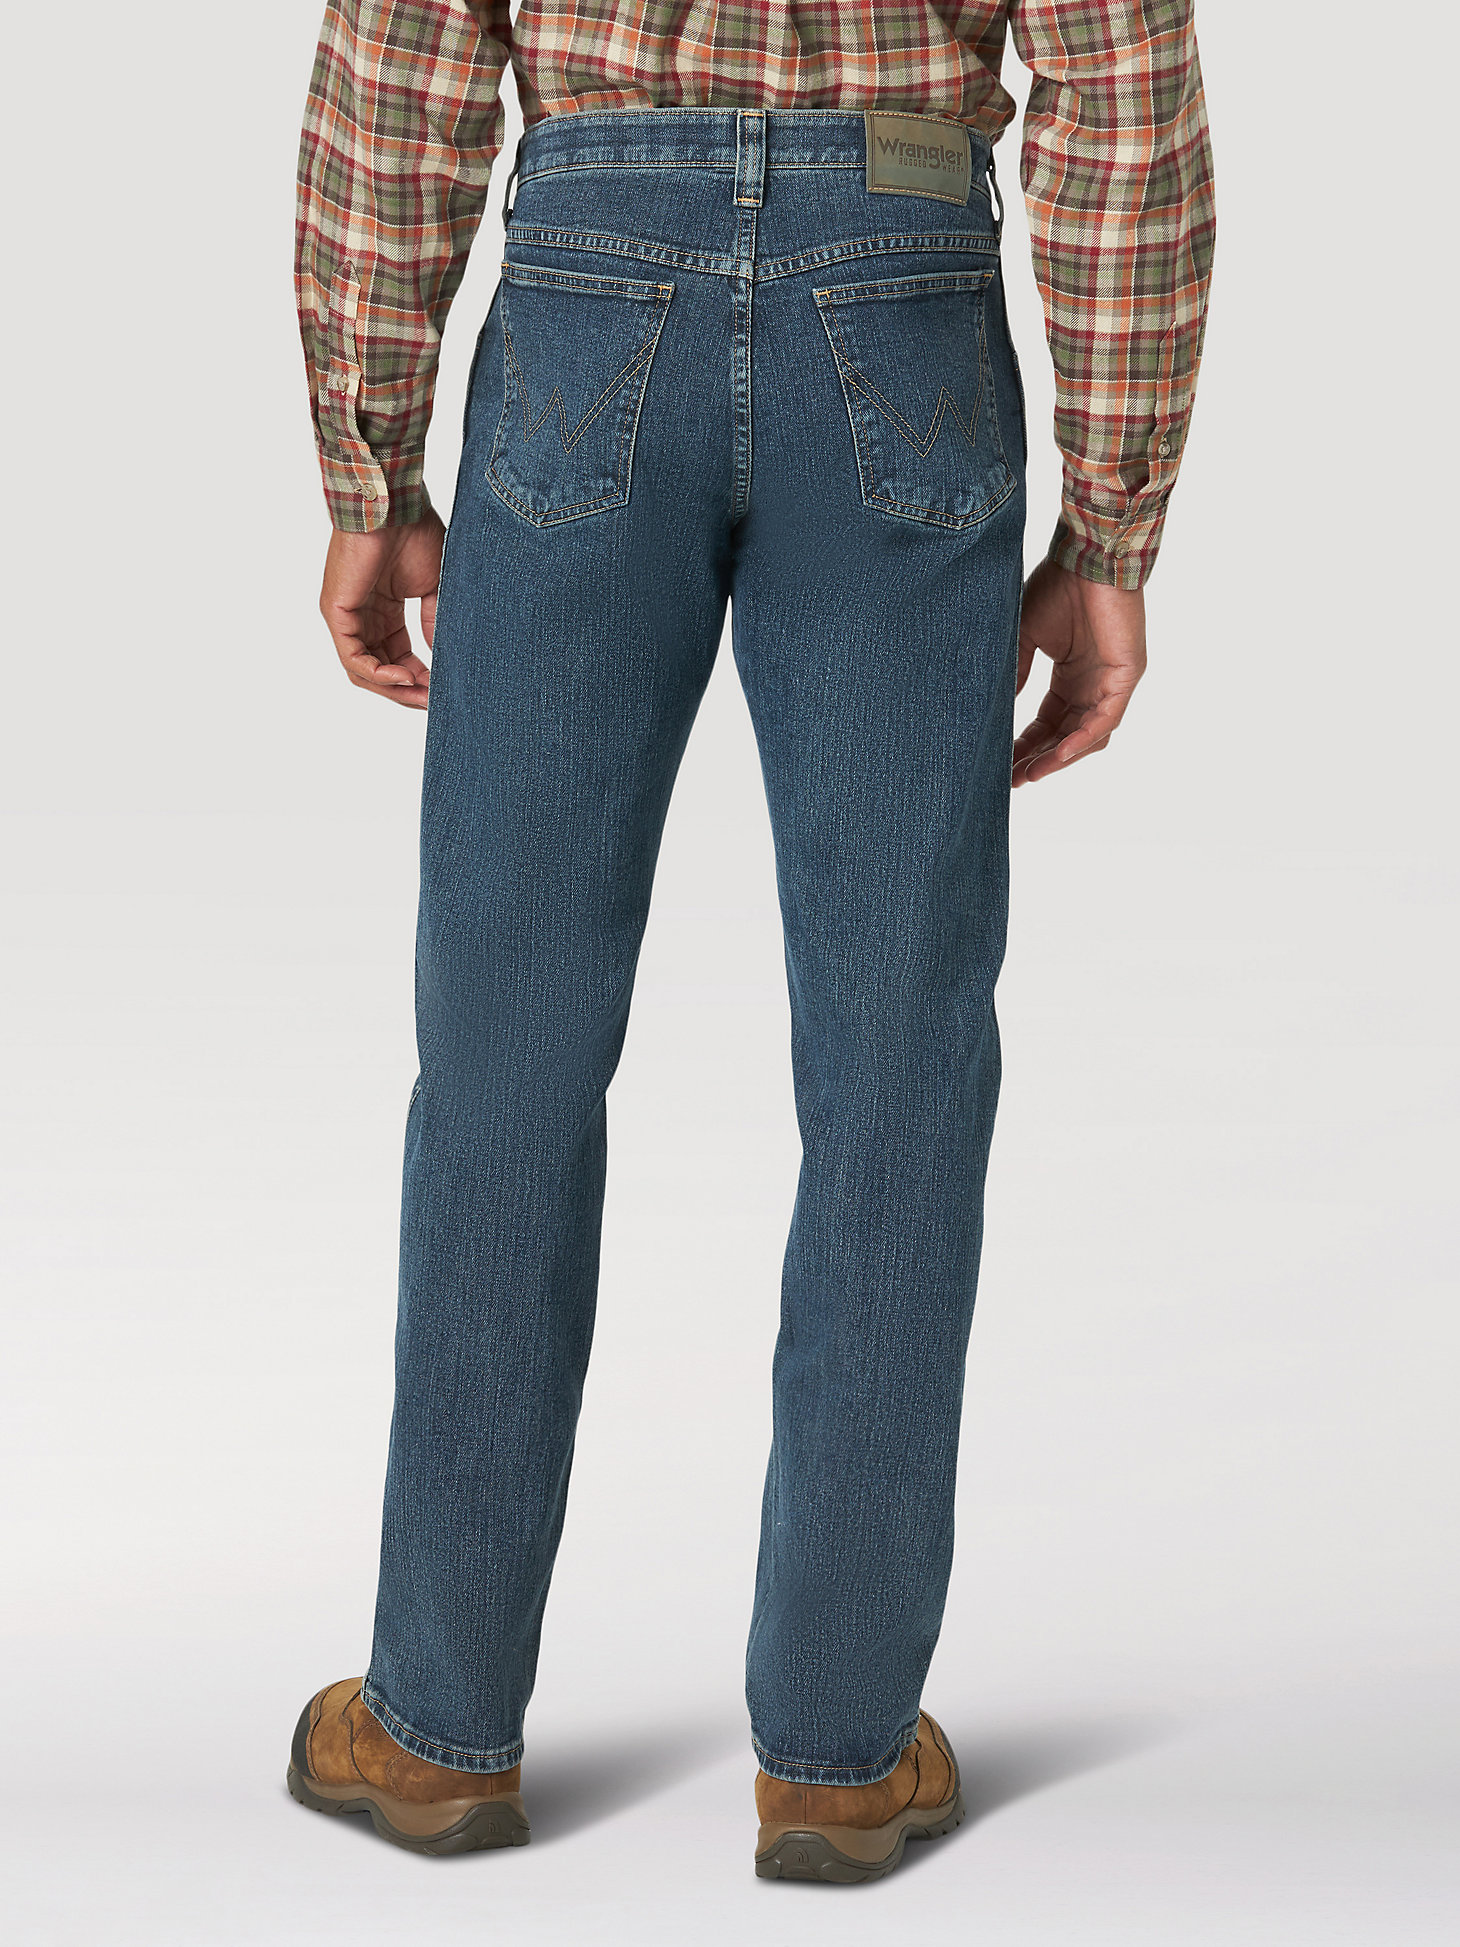 Wrangler Rugged Wear® Performance Series Relaxed Fit Jean in Mid Stone alternative view 2